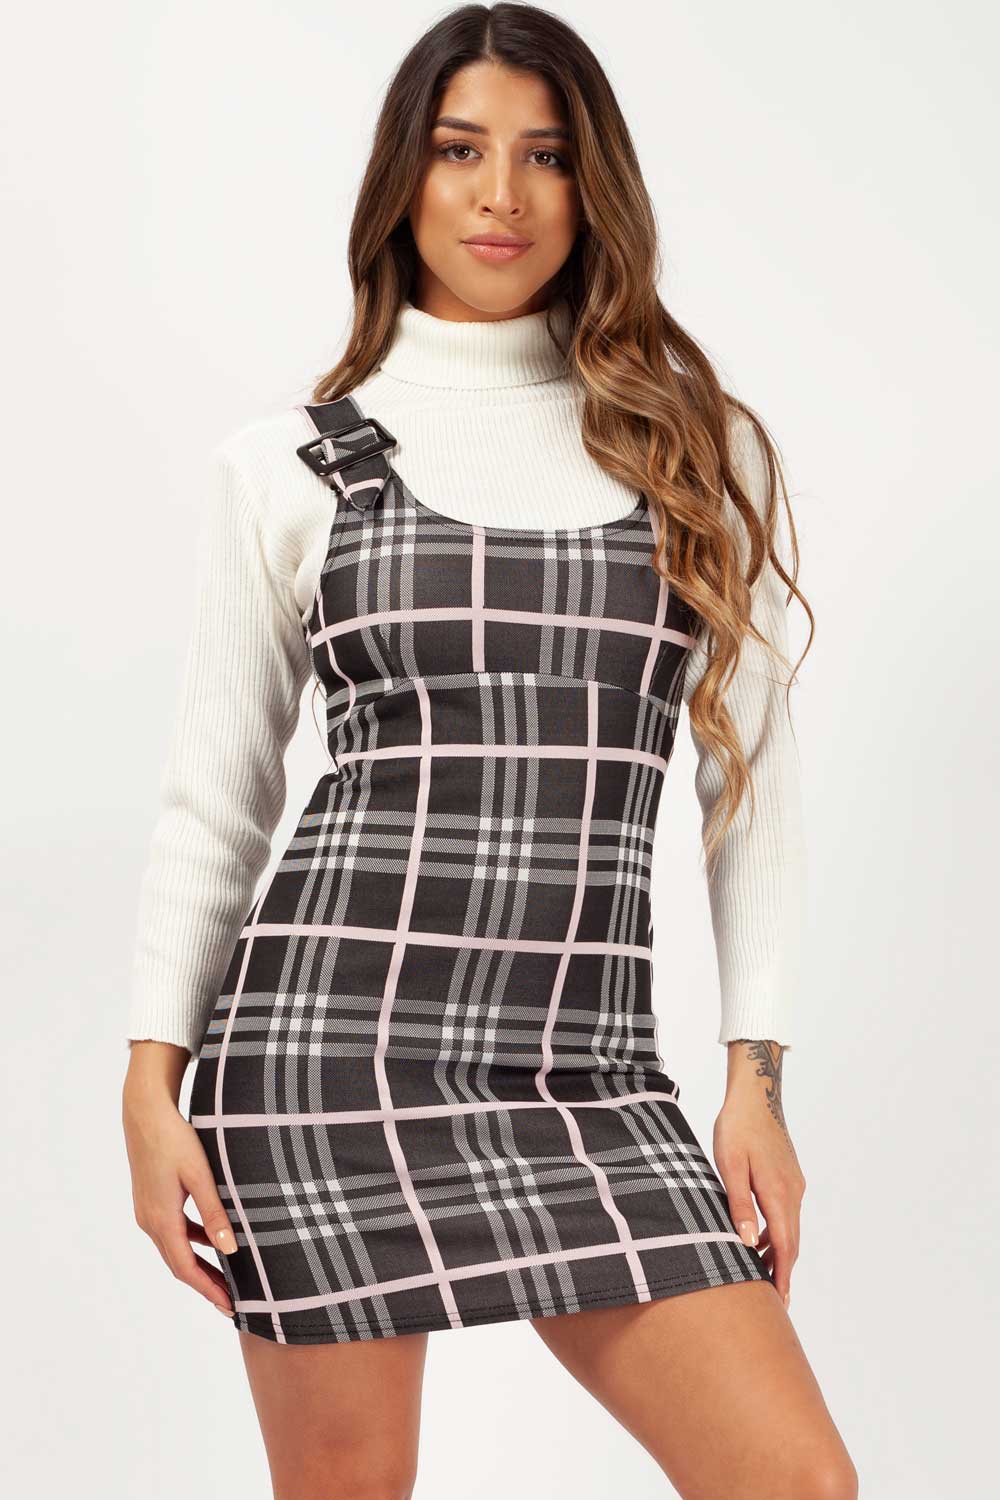 checked buckle detail pinafore dress